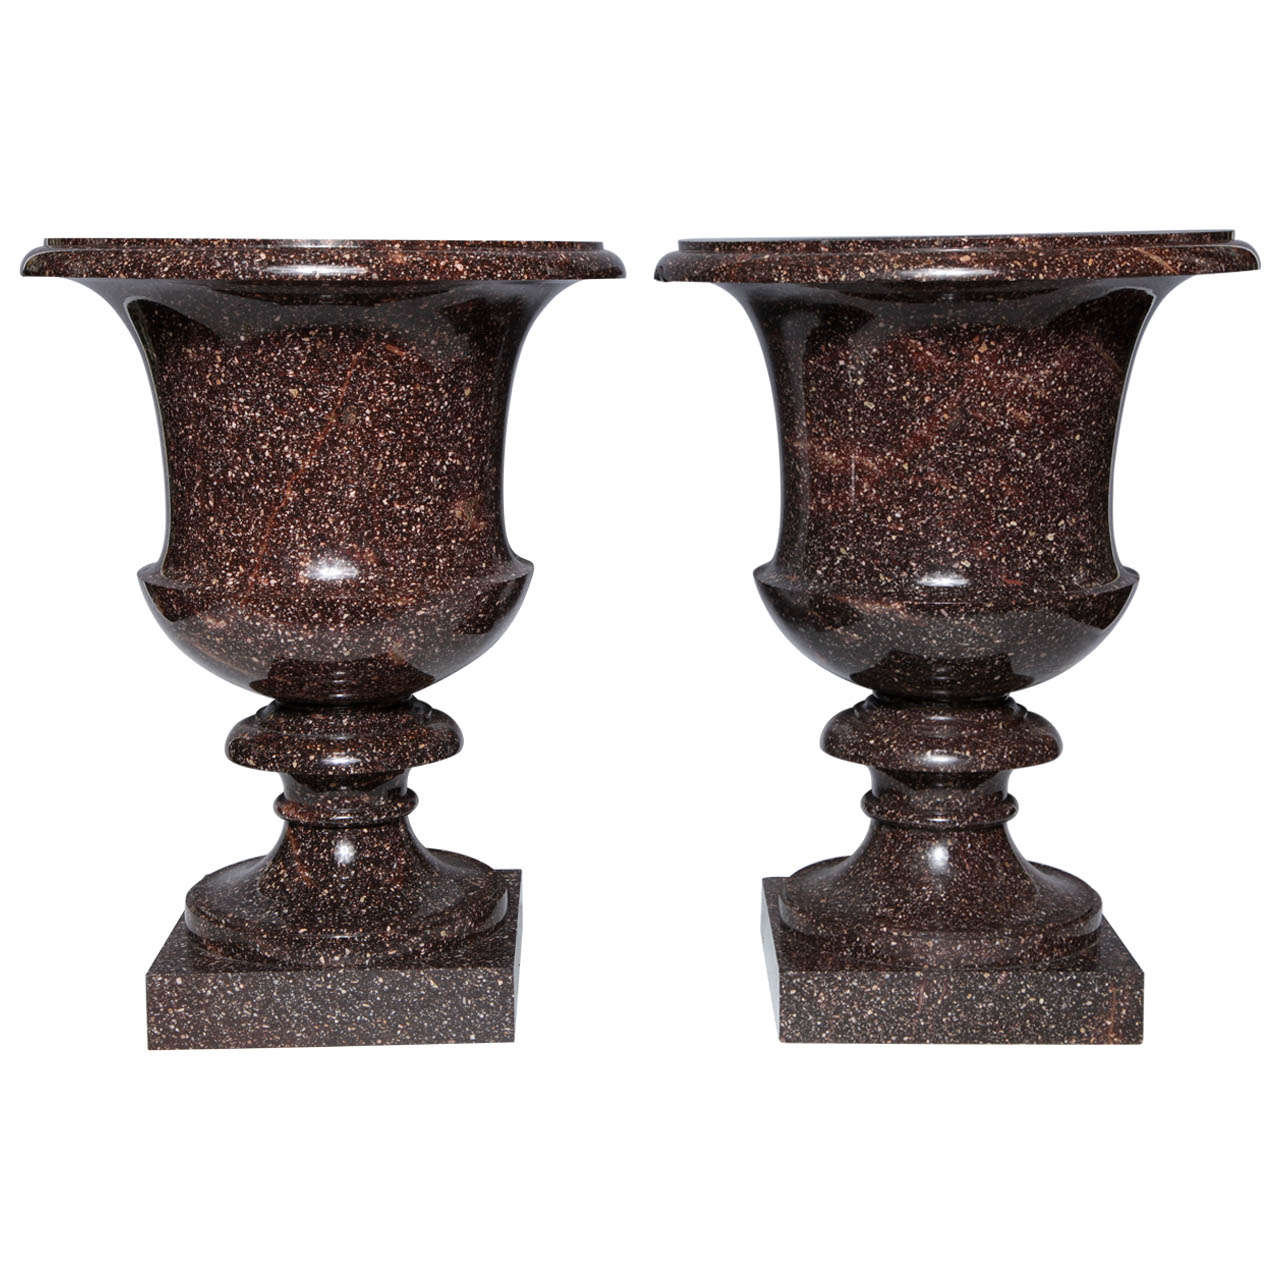 Monumental Pair of Neoclassical Period, Swedish Porphyry Campagna Shaped Vases For Sale